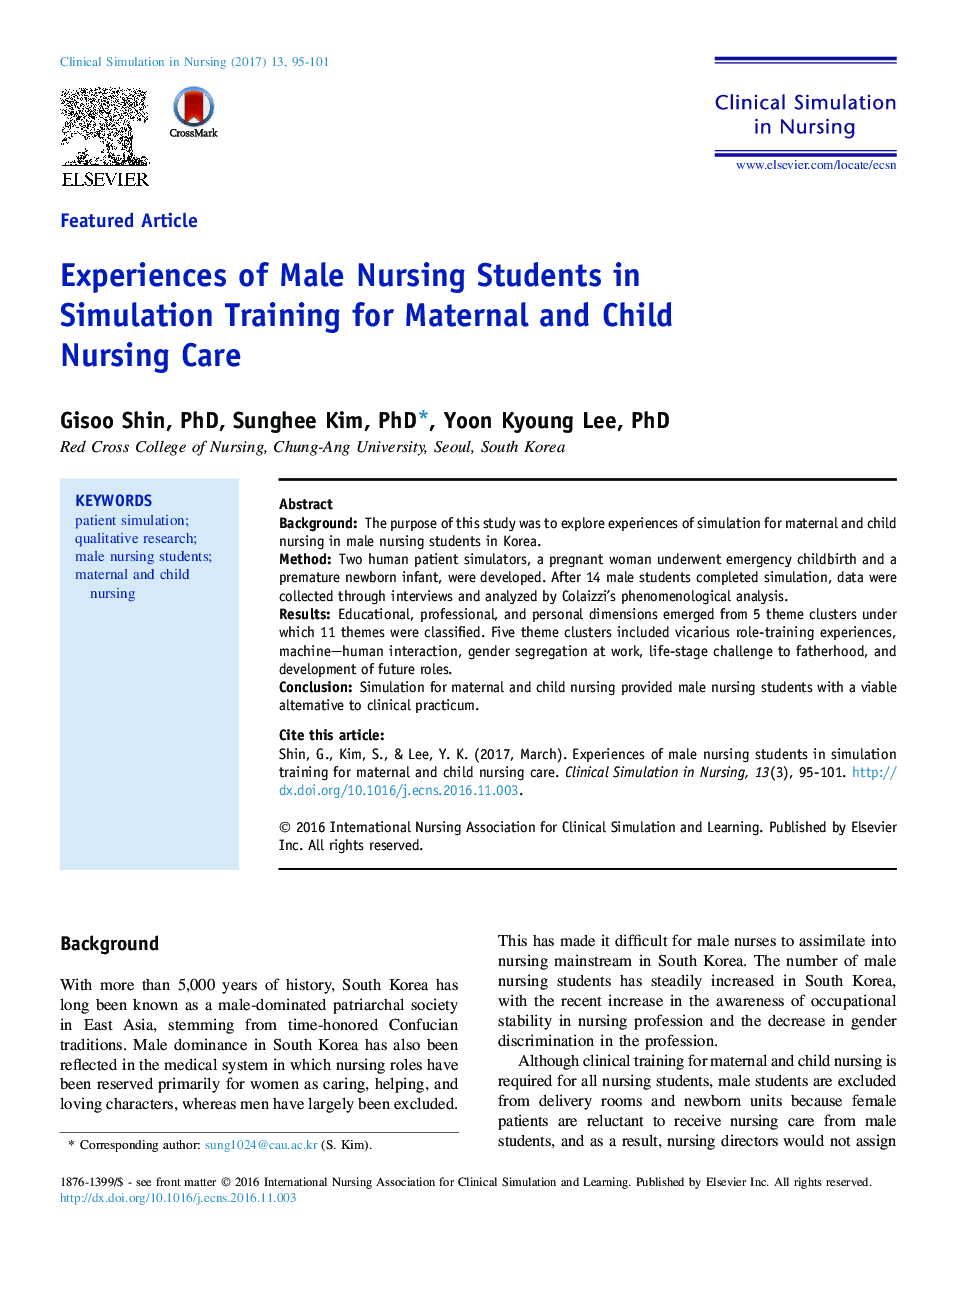 Experiences of Male Nursing Students in Simulation Training for Maternal and Child NursingÂ Care